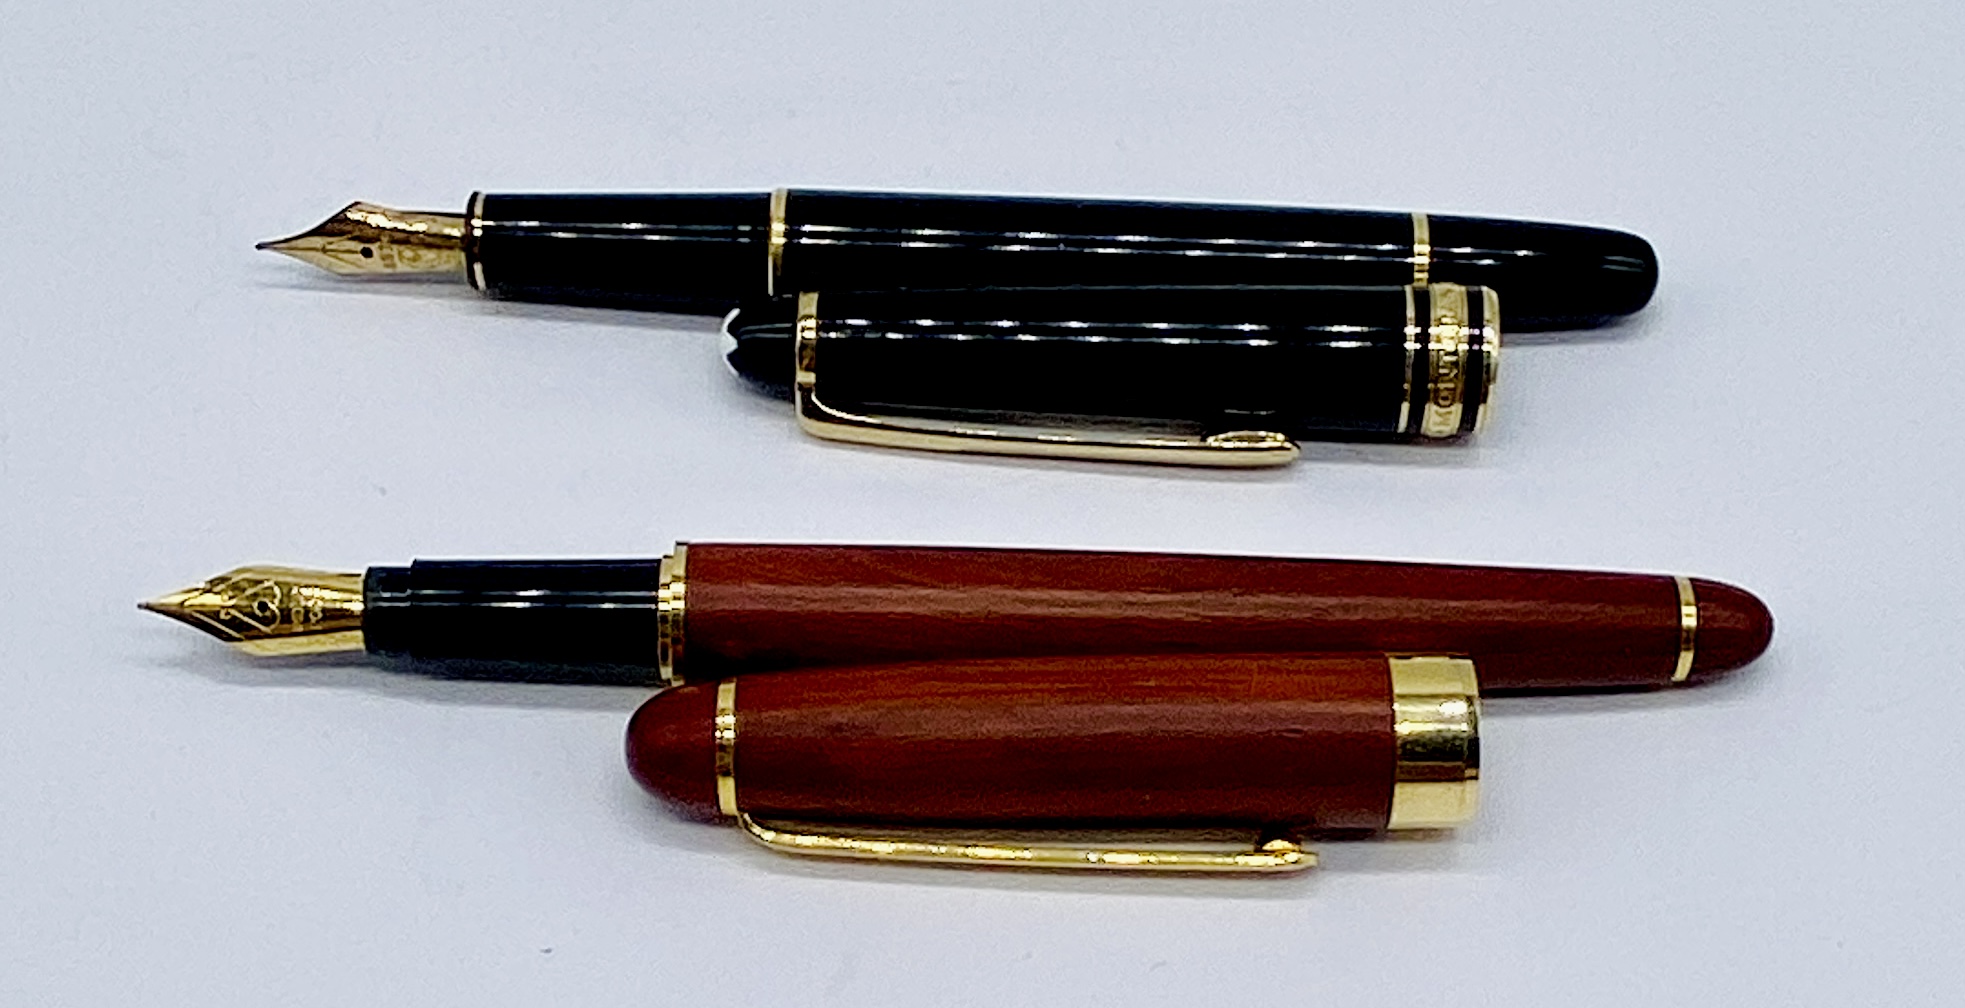 A Mont Blanc Meisterstuck fountain pen along with one other - Image 4 of 5